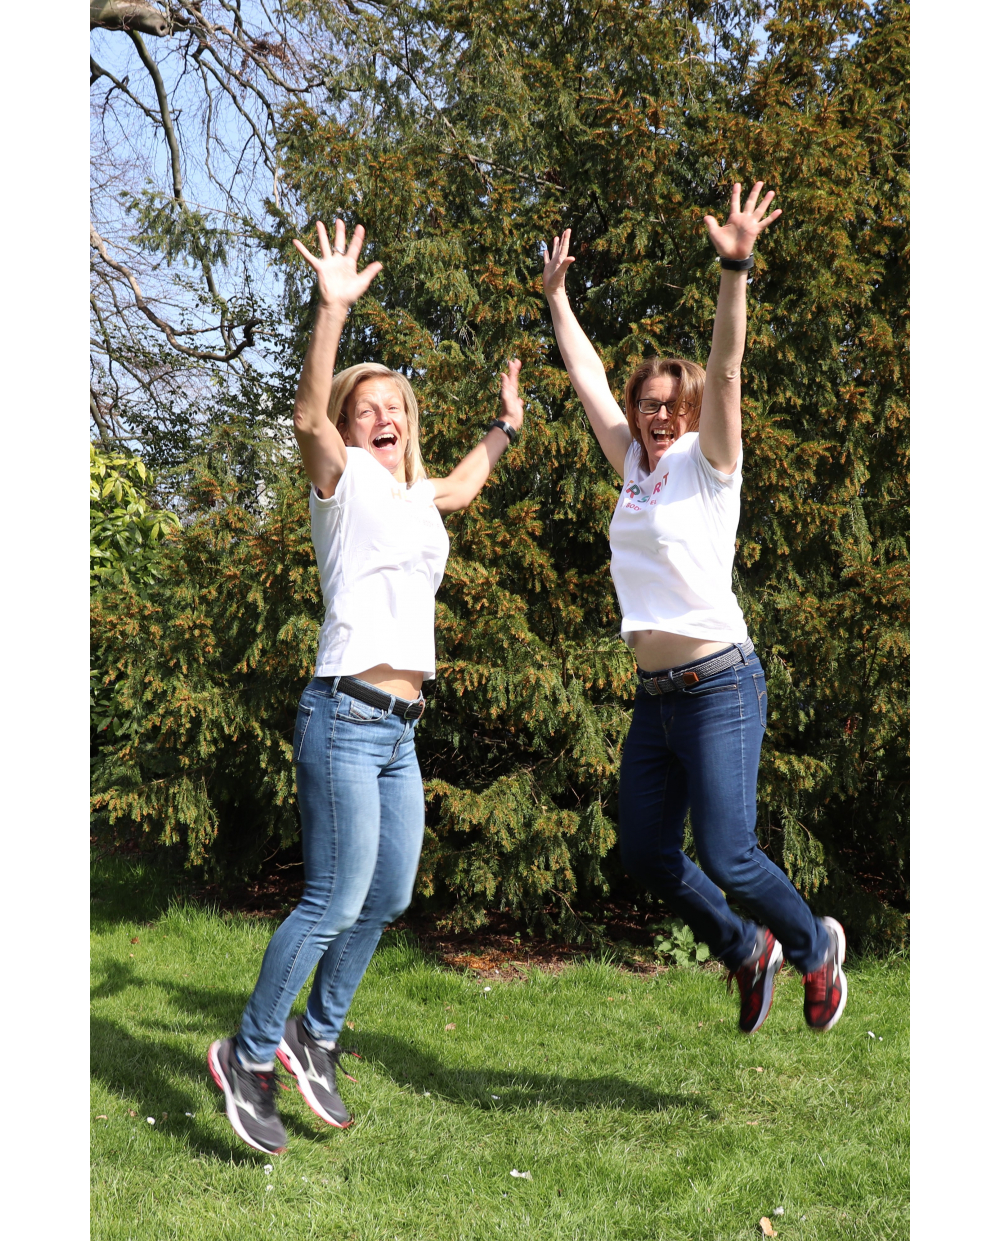 Two womens wearing white t-shirts and jeans are jumping